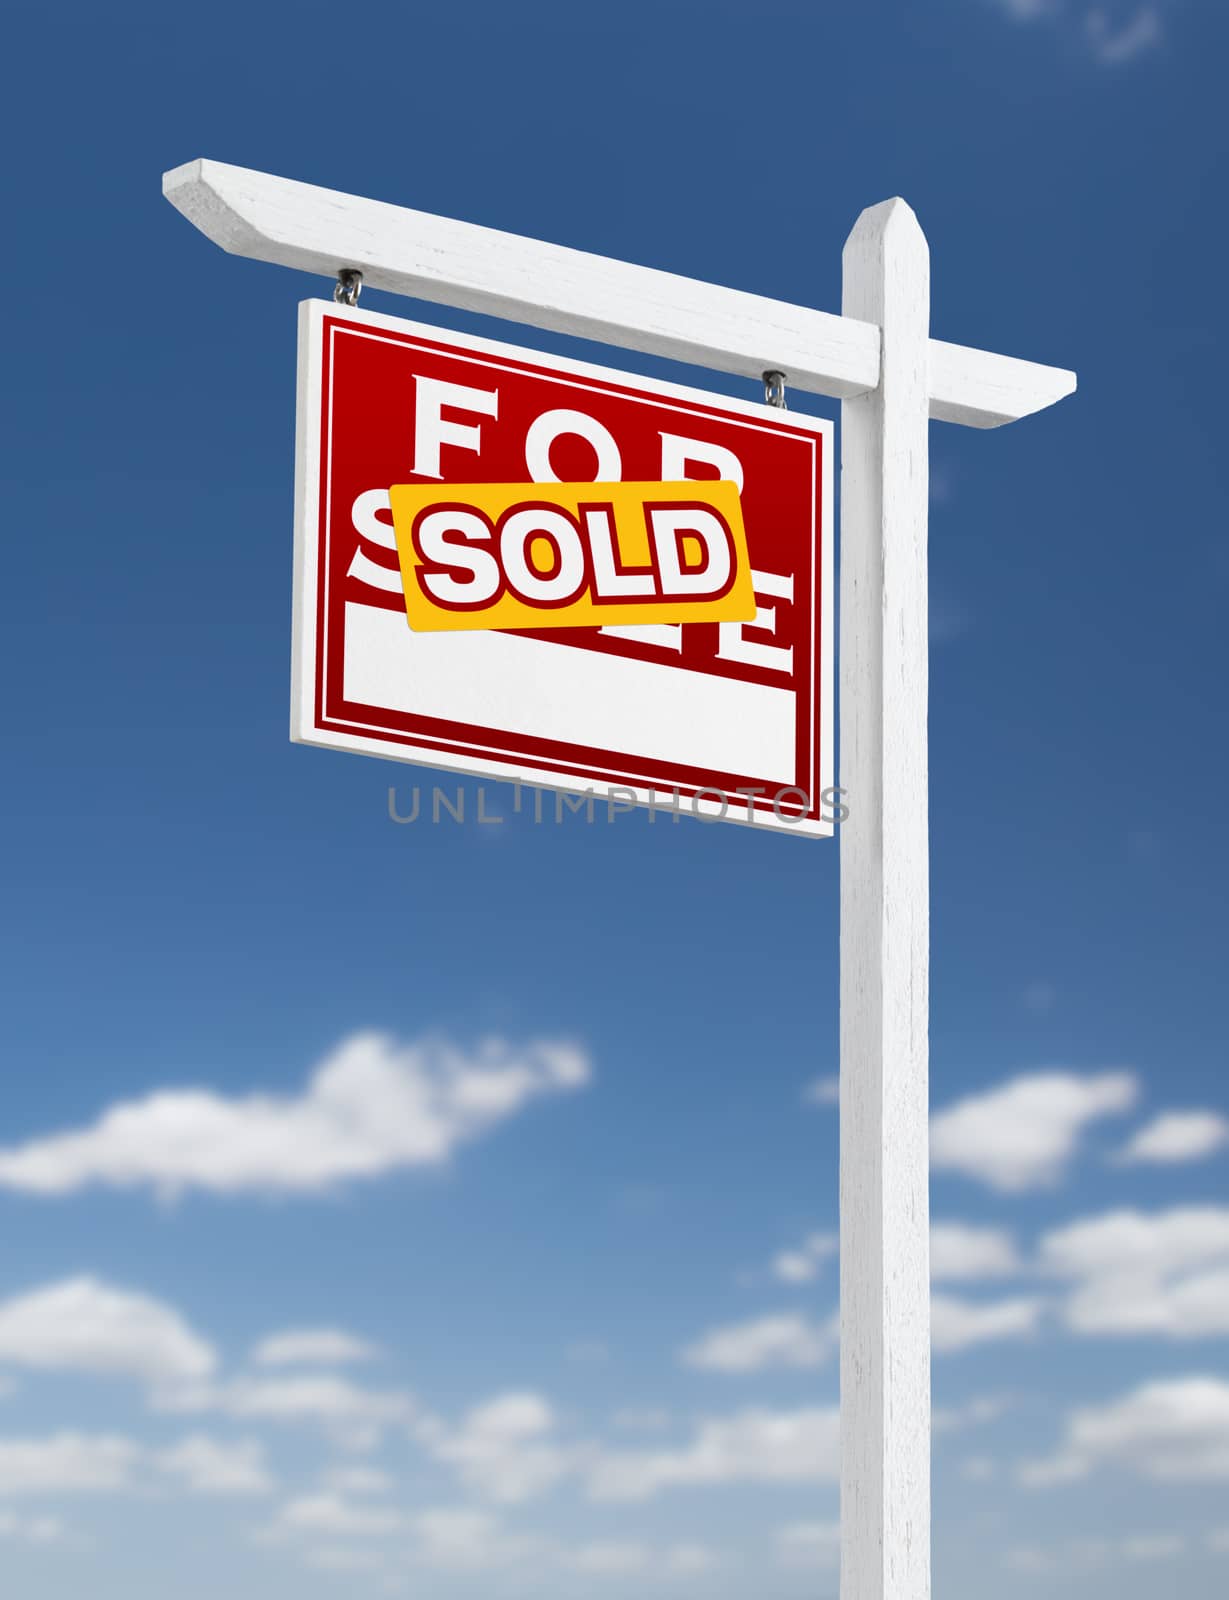 Left Facing Sold For Sale Real Estate Sign on a Blue Sky with Cl by Feverpitched